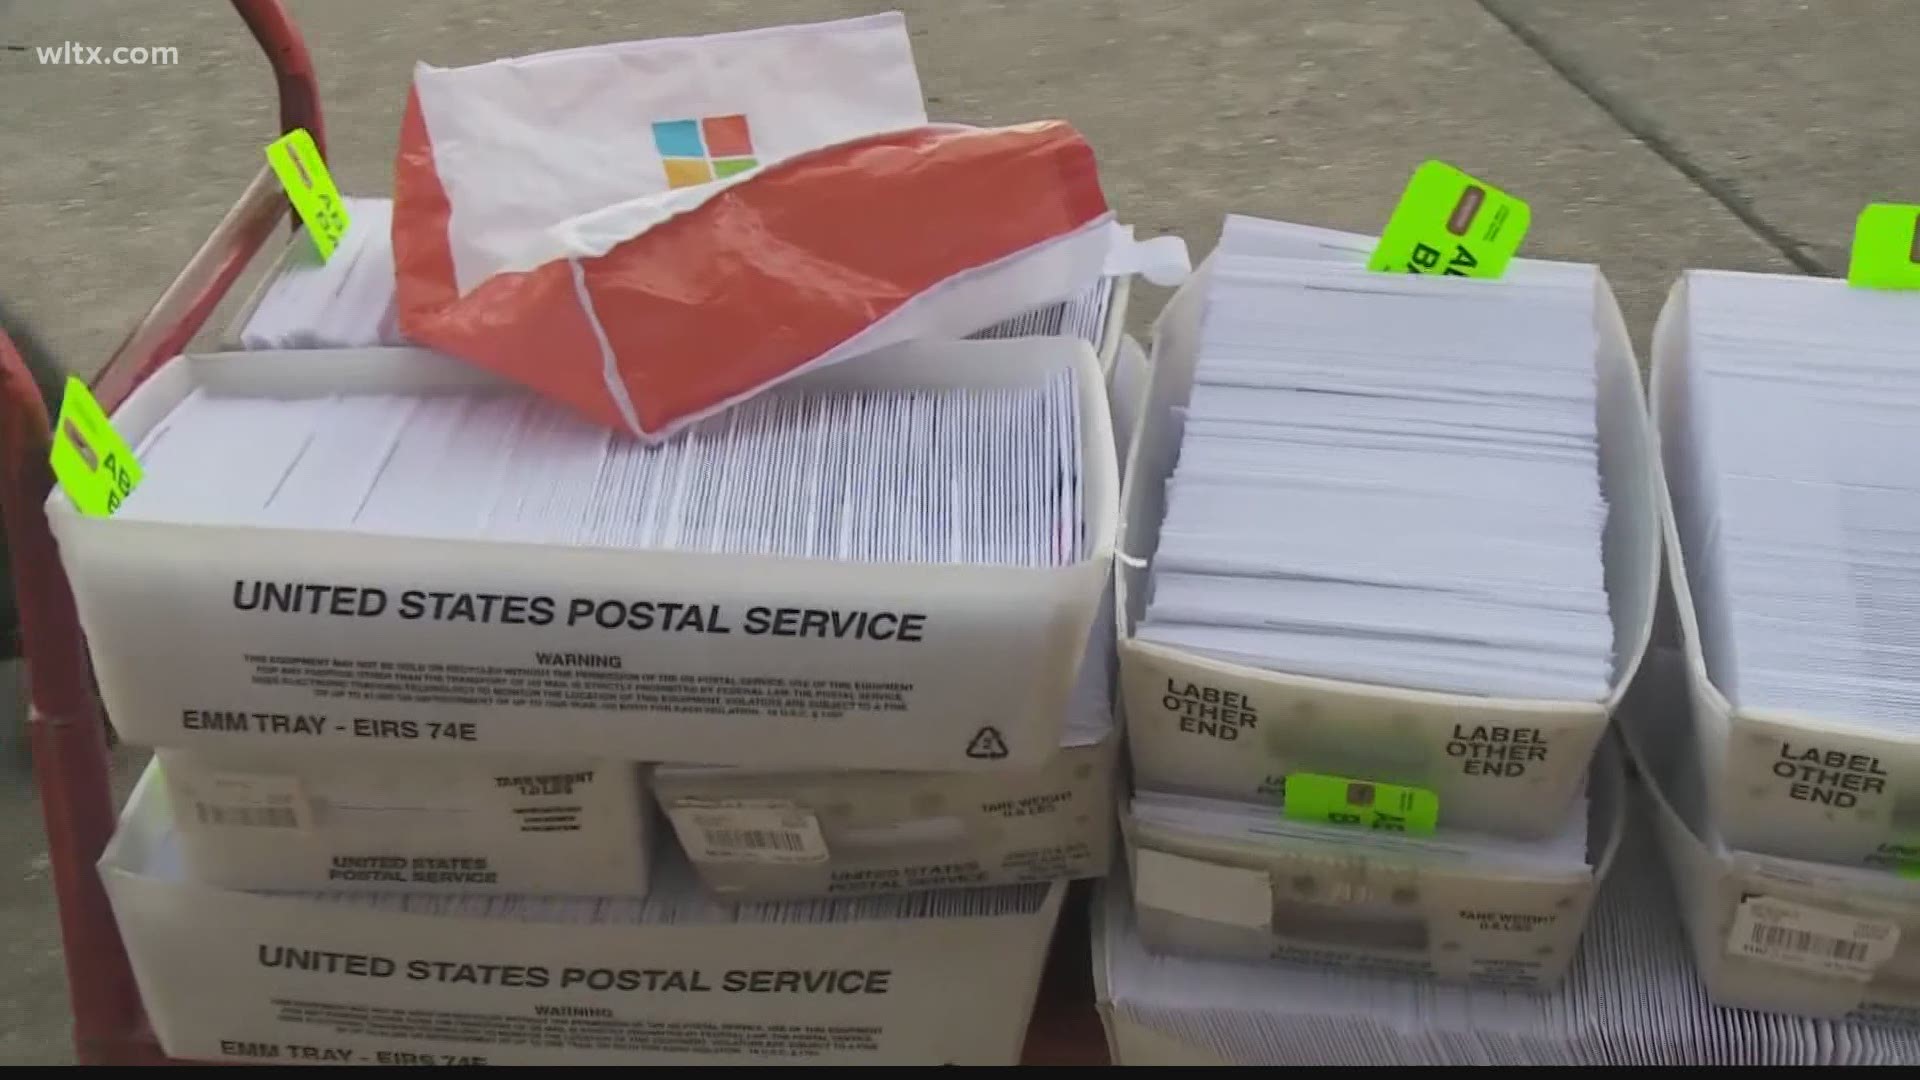 354,000 SC voters have voted absentee mail in